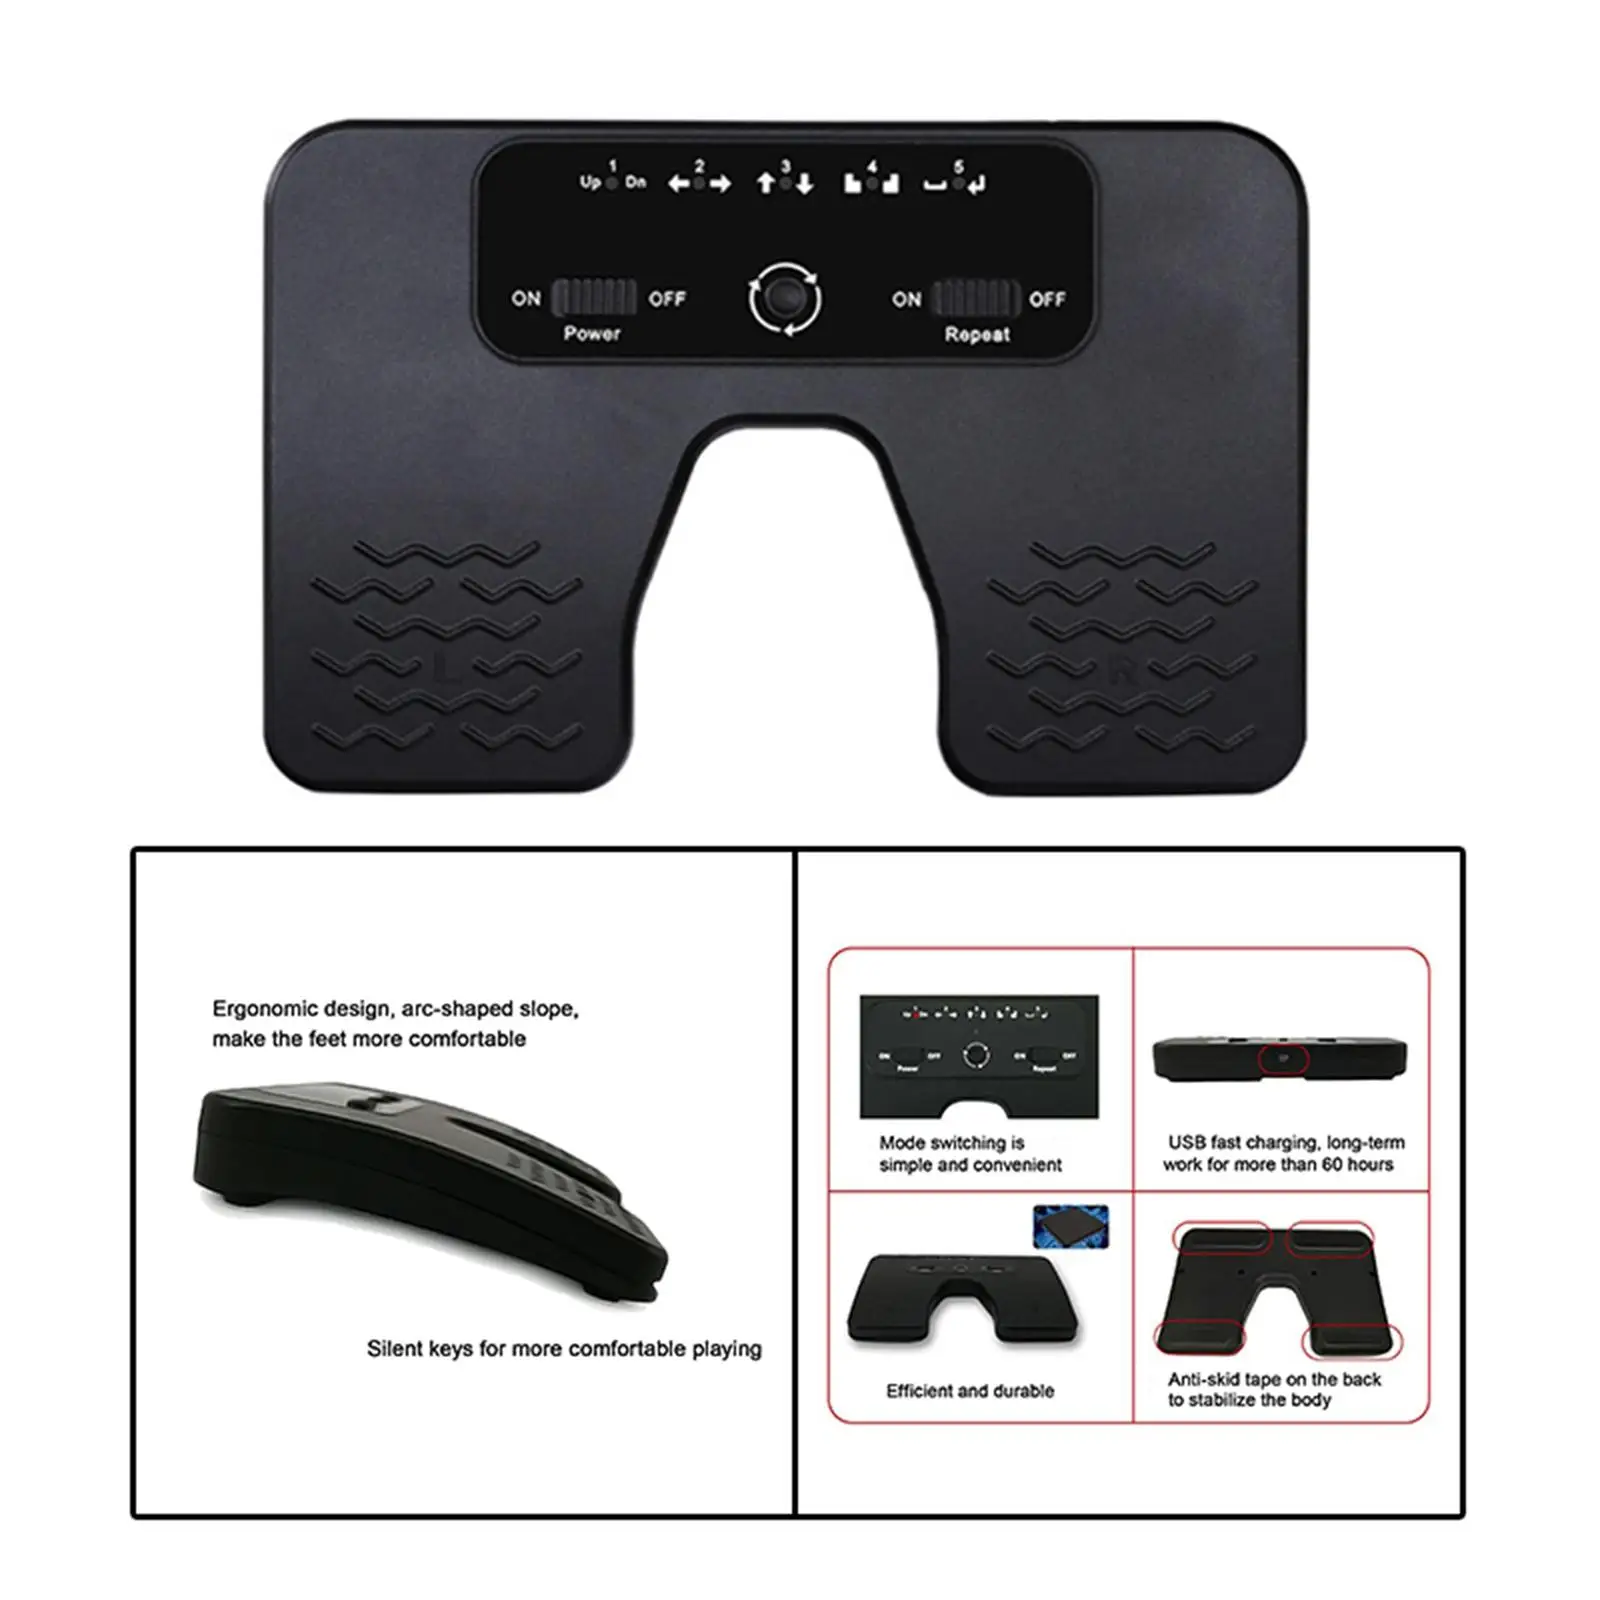 Page Turner Music Anti Skid Music Instrument Accessories Tools Rechargeable Music Pedal for Tablets PC Violin Guitar Computer